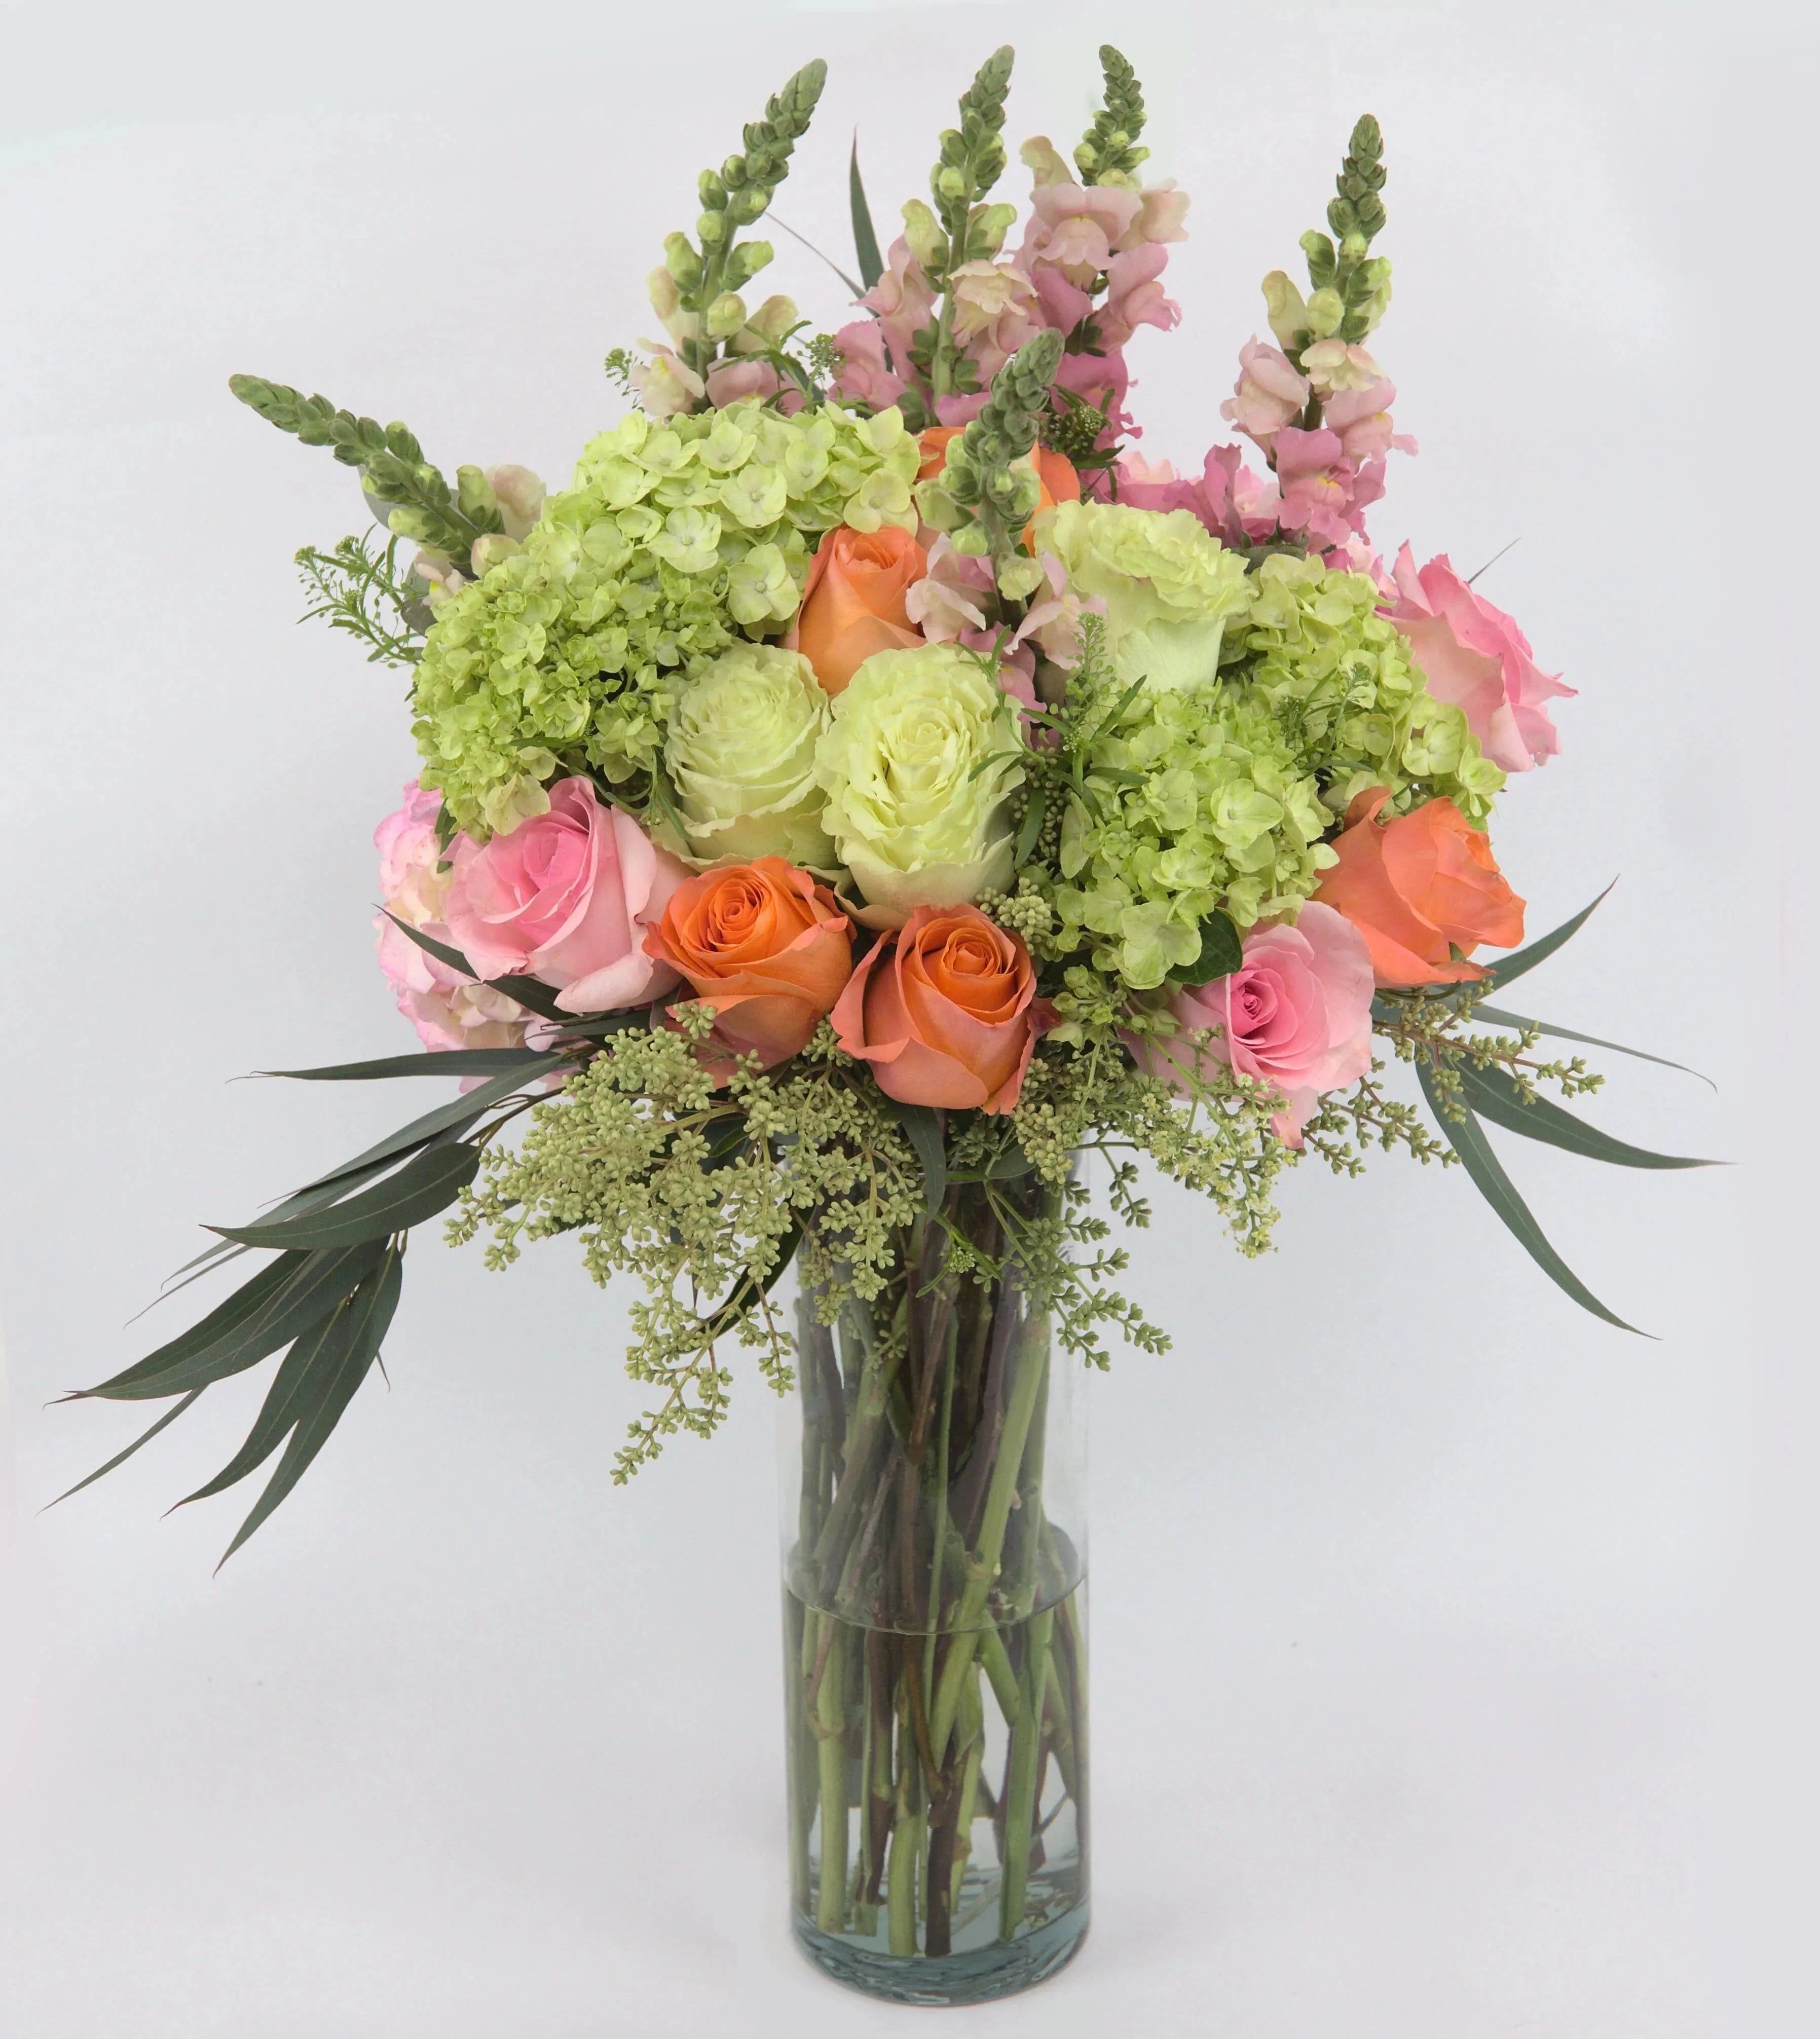 Irreplaceable™ Luxury Bouquet - Vase of pink, peach, and green roses, with green and pink hydrangea blooms, snapdragons, bupleurum, seeded eucalyptus, and lush greens